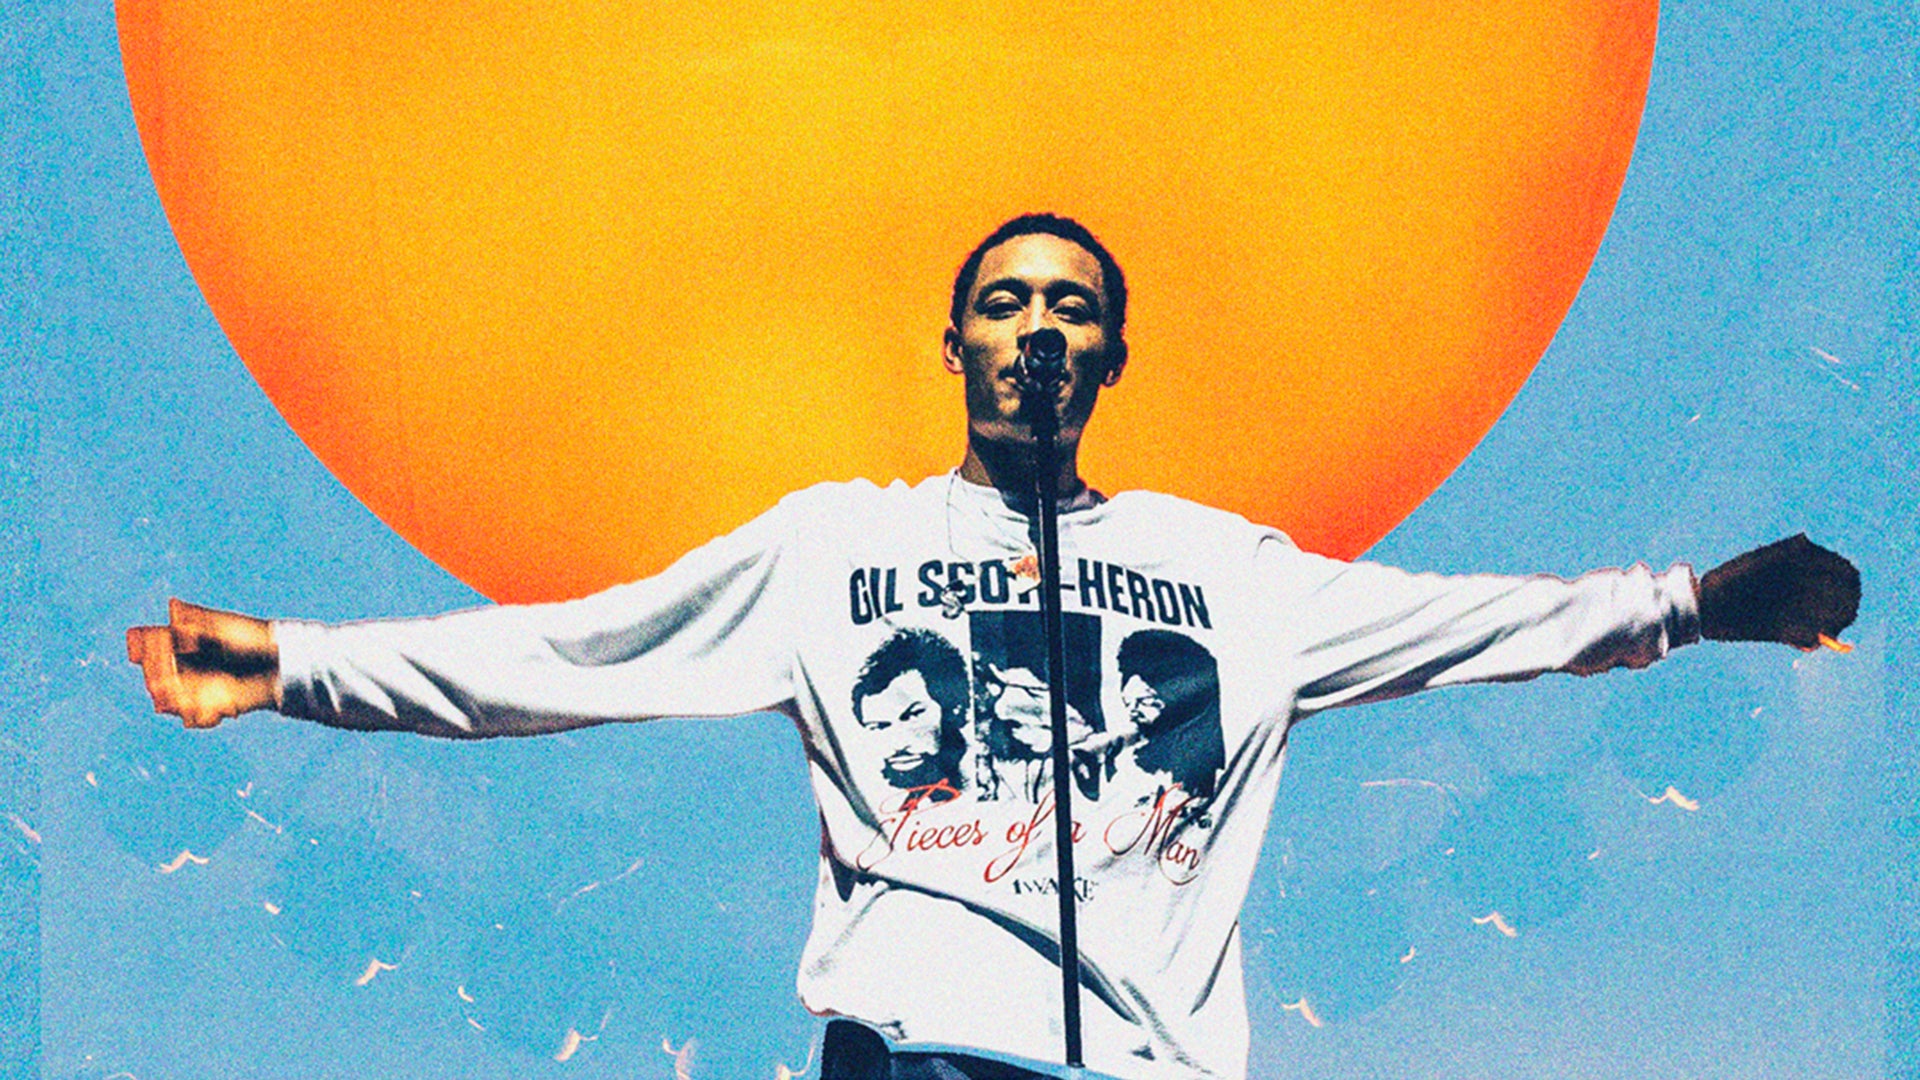 Loyle Carner at Swg3 Tickets